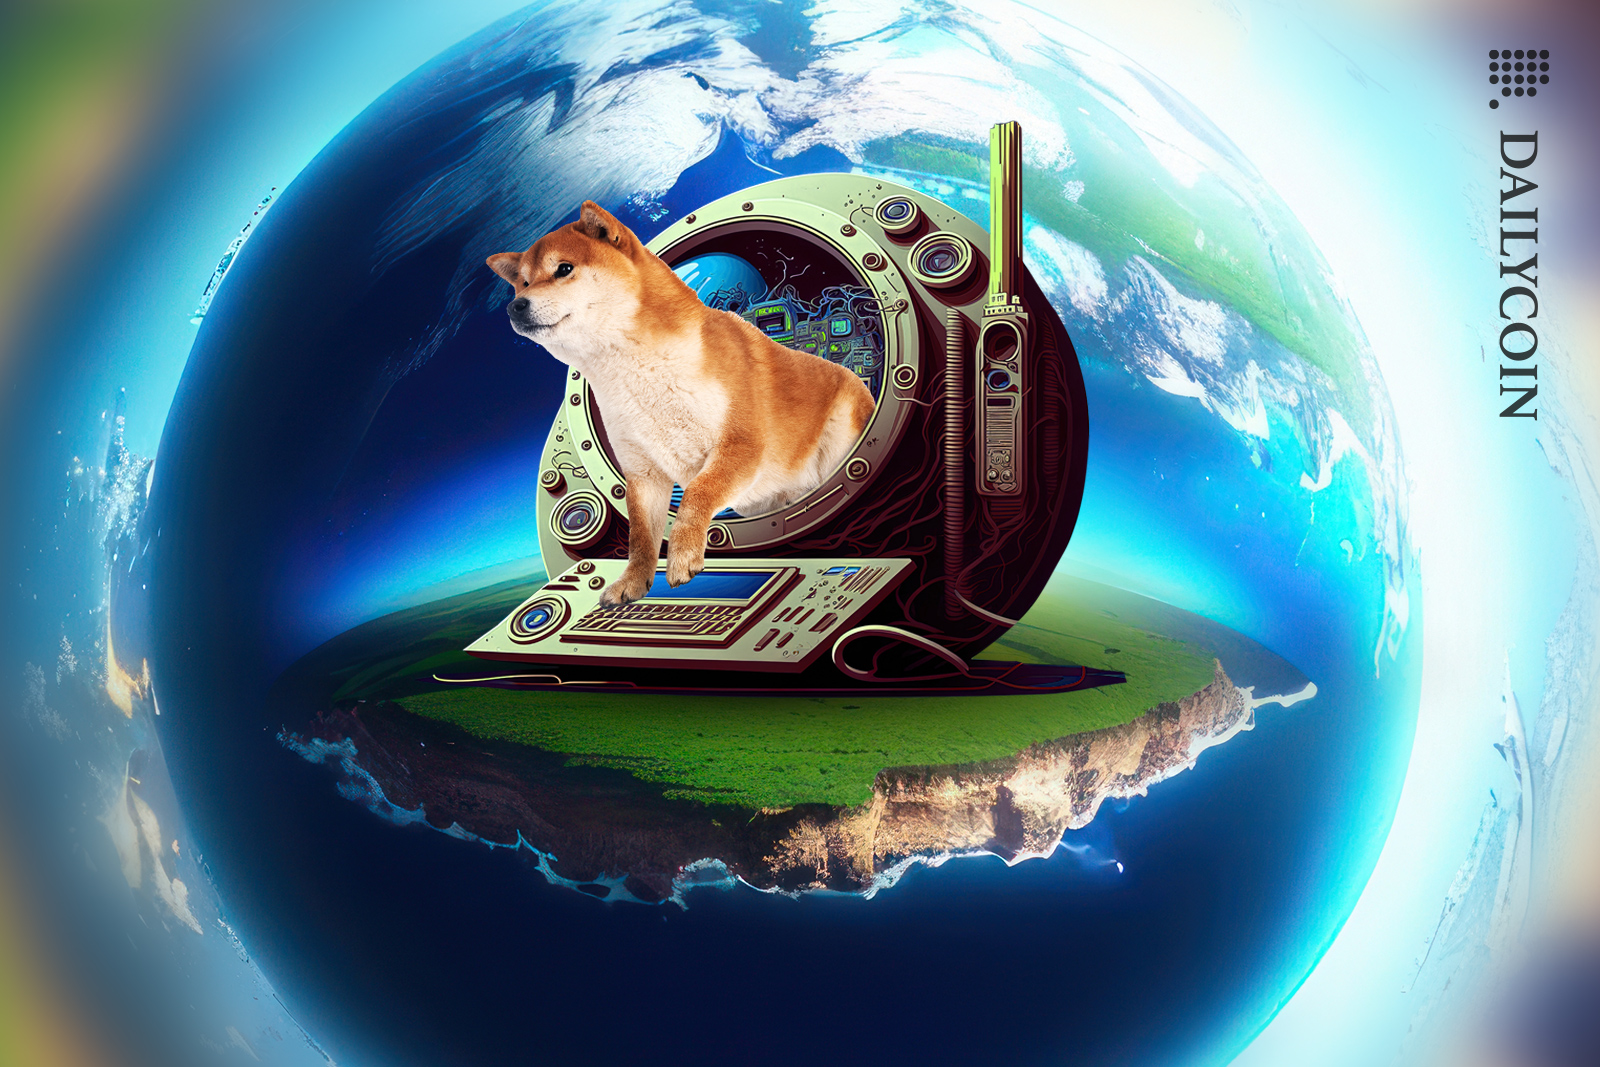 Shiba Inu coming out of a circular futuristic computer onto a land surrounded by the globe.